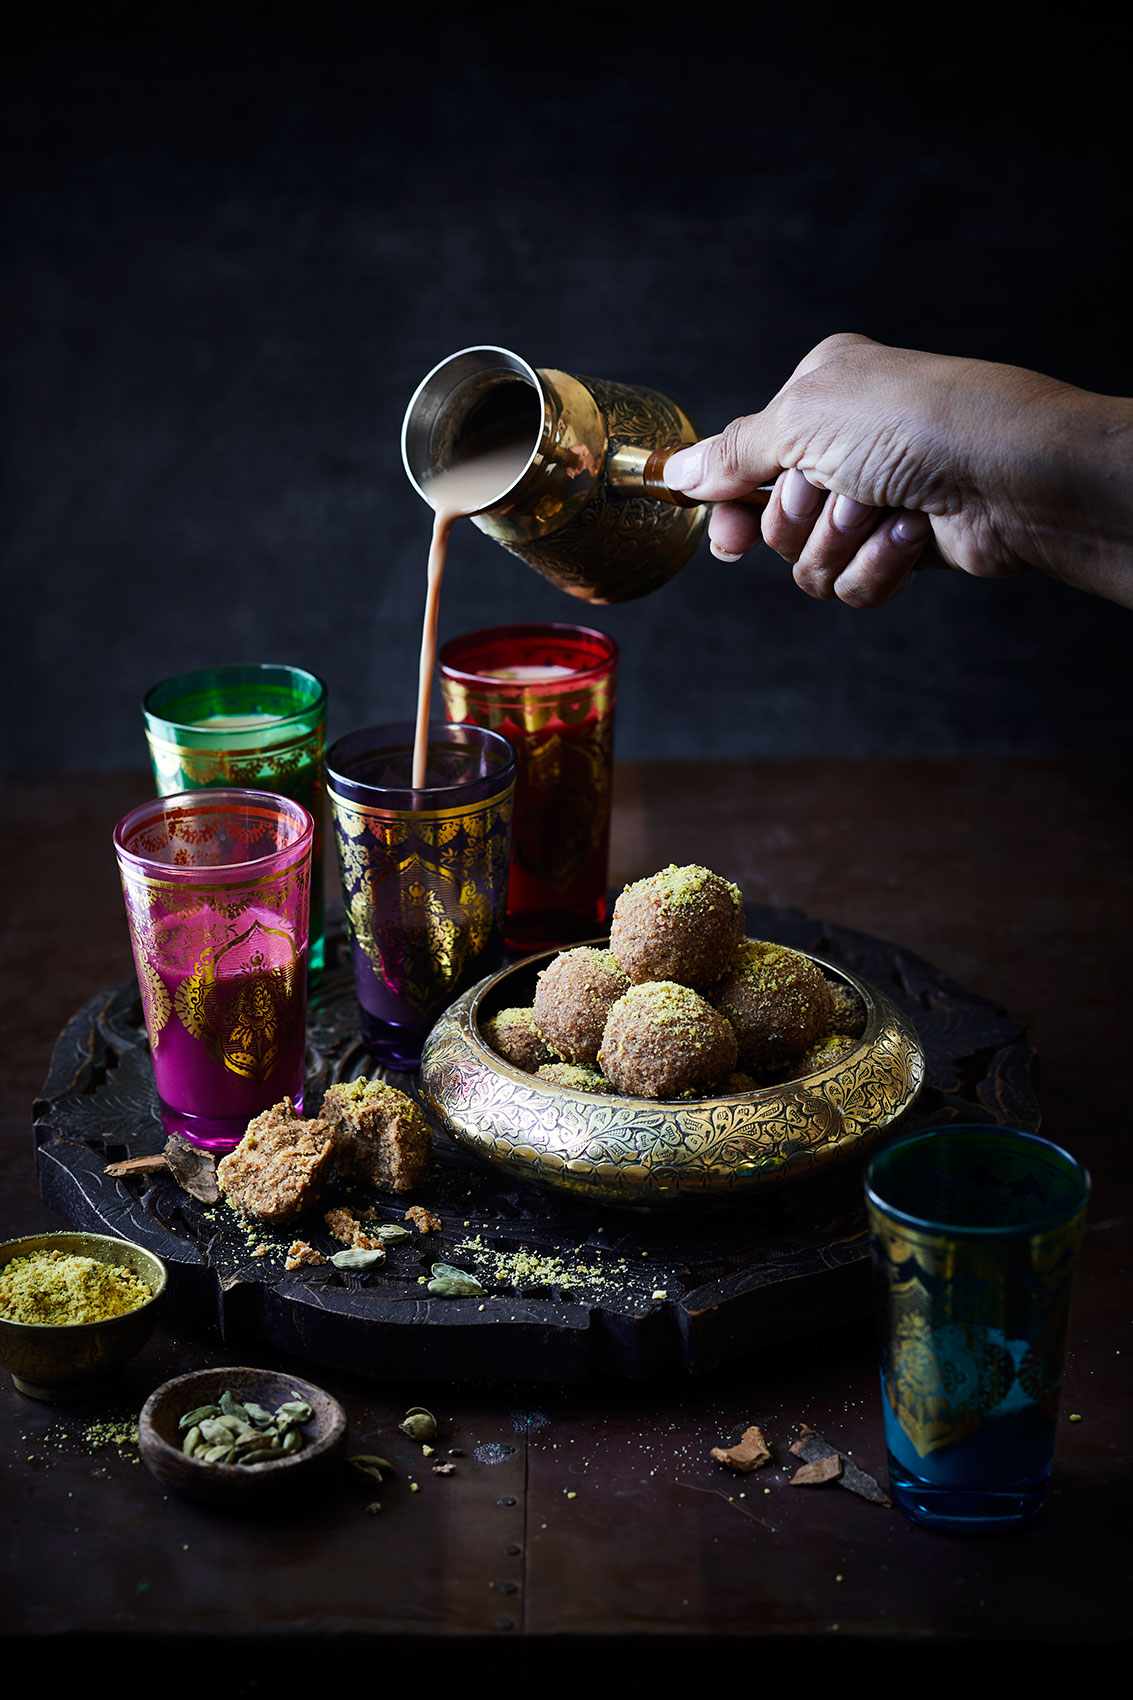 My Indian Kitchen • Almond Pistachio Ladoo with Chai Tea • Cookbook & Editorial Food Photography